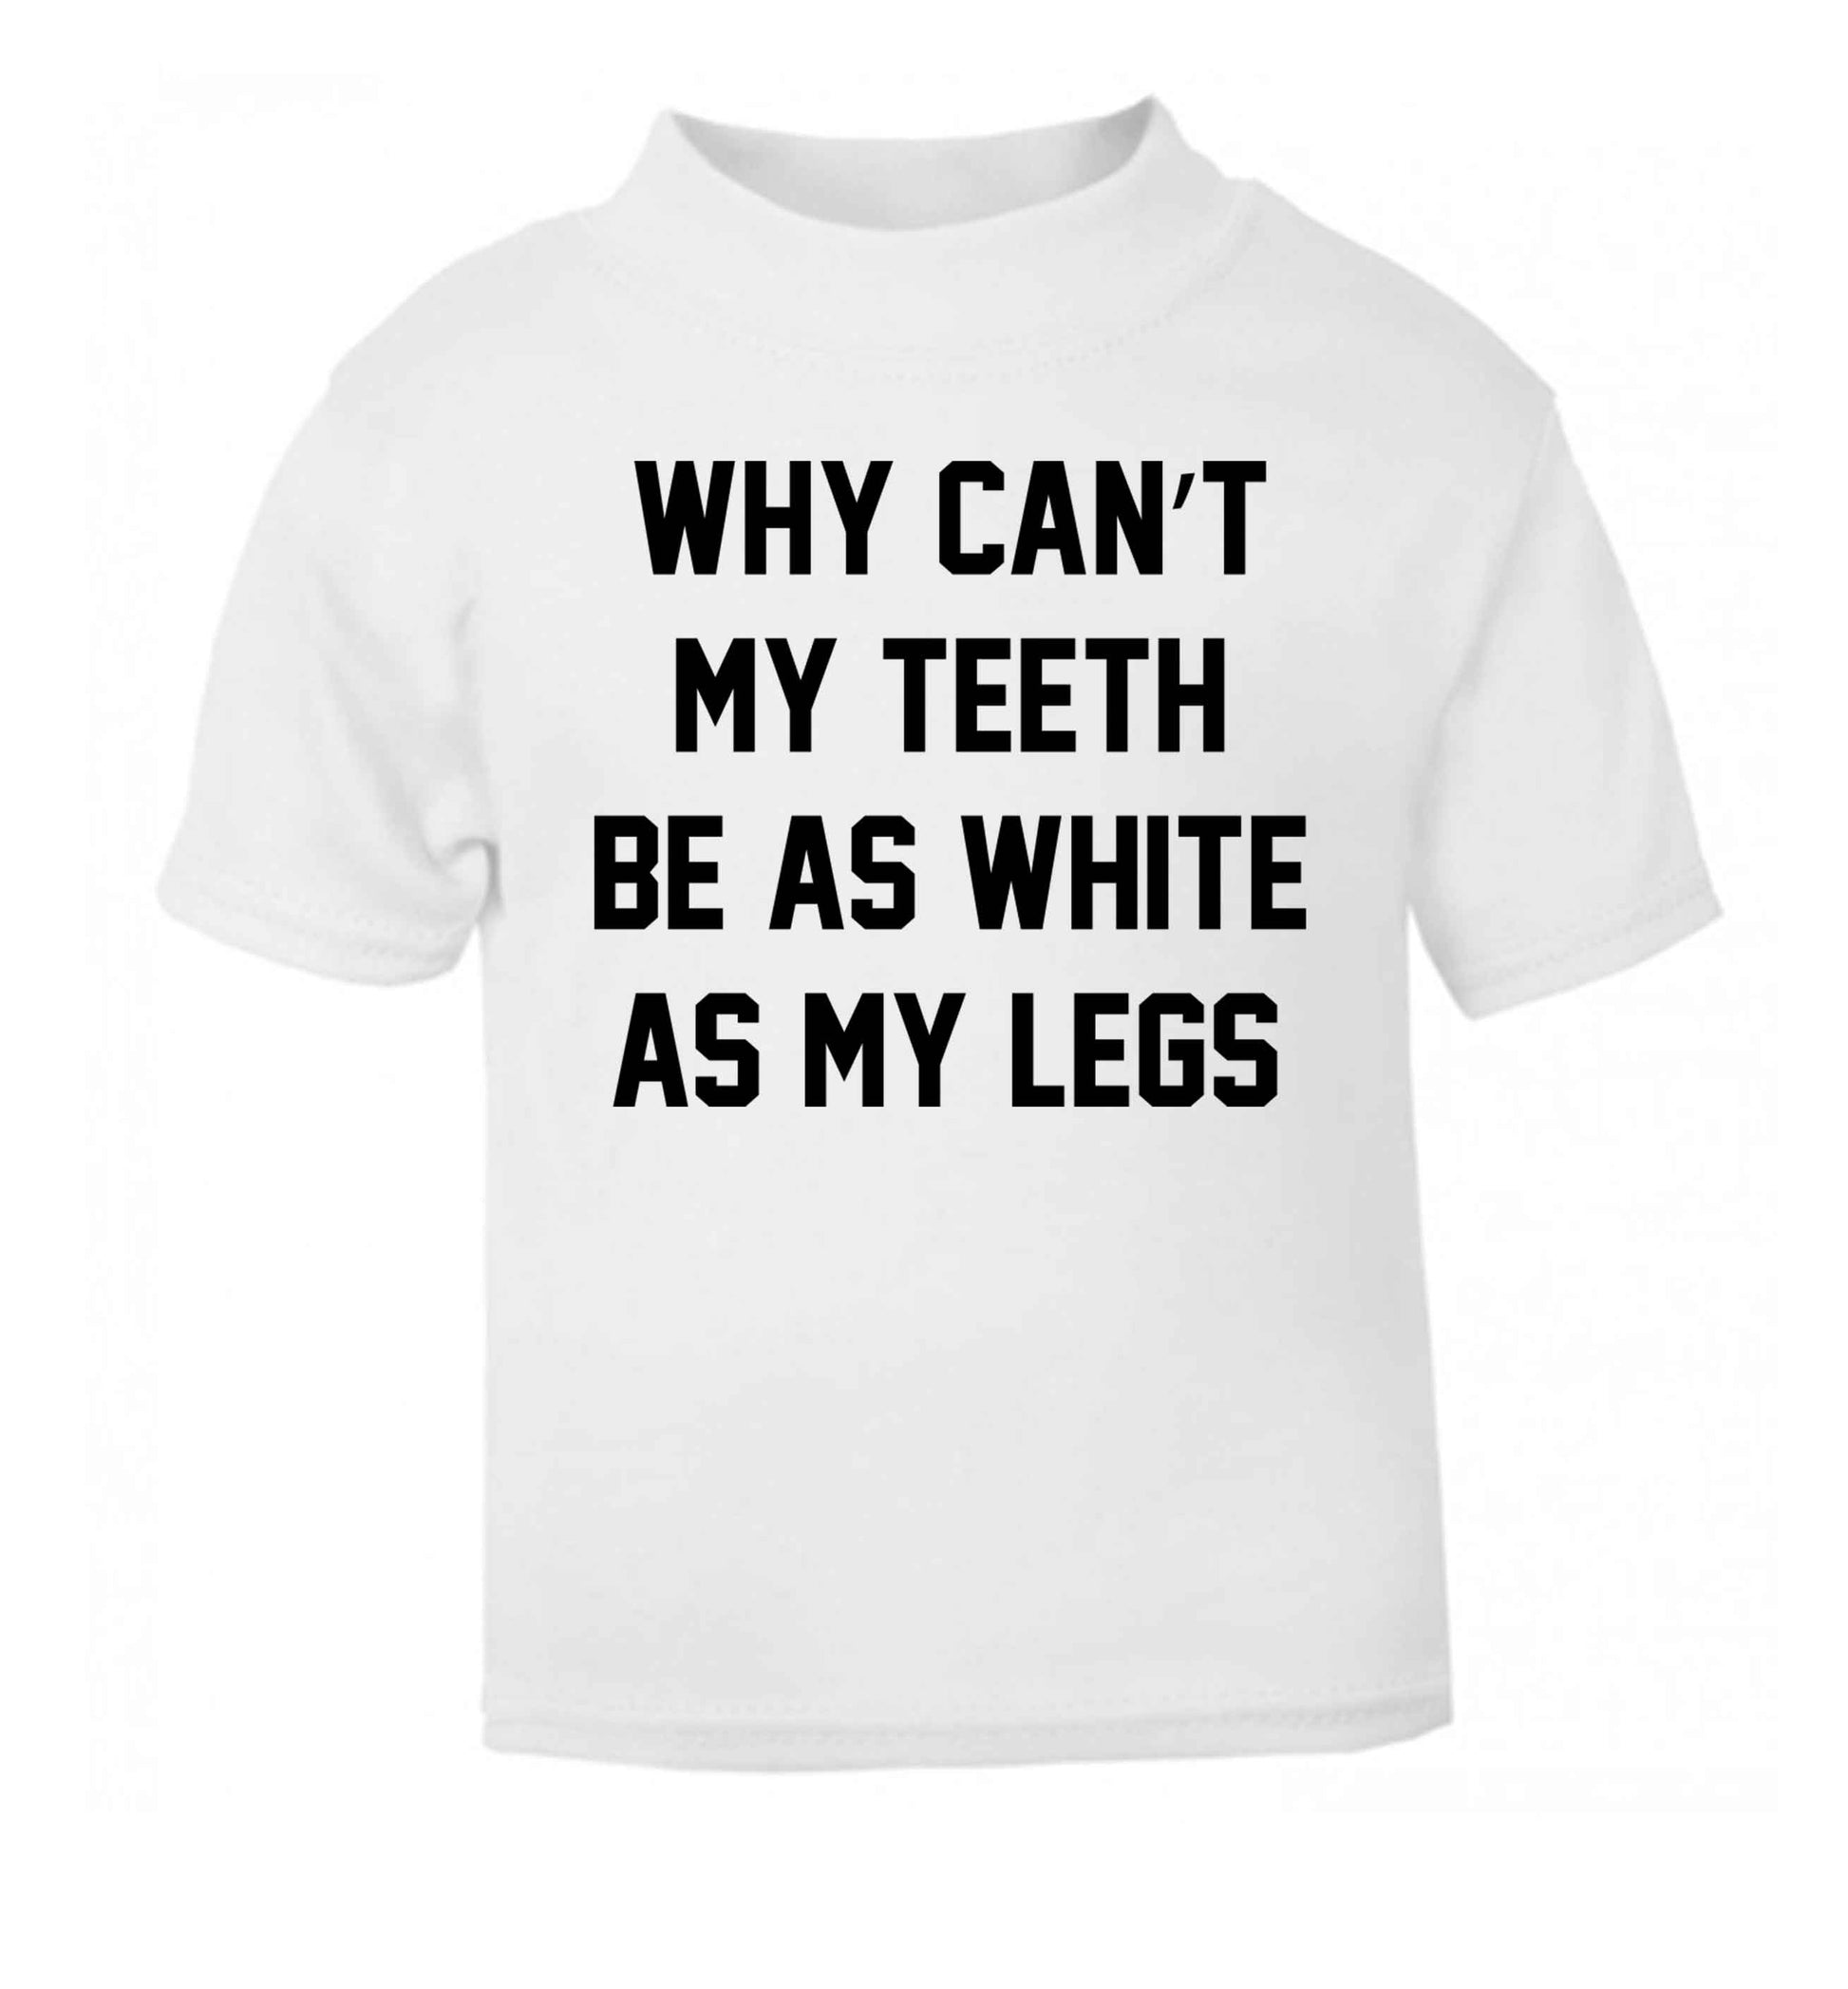 Why can't my teeth be as white as my legs white Baby Toddler Tshirt 2 Years